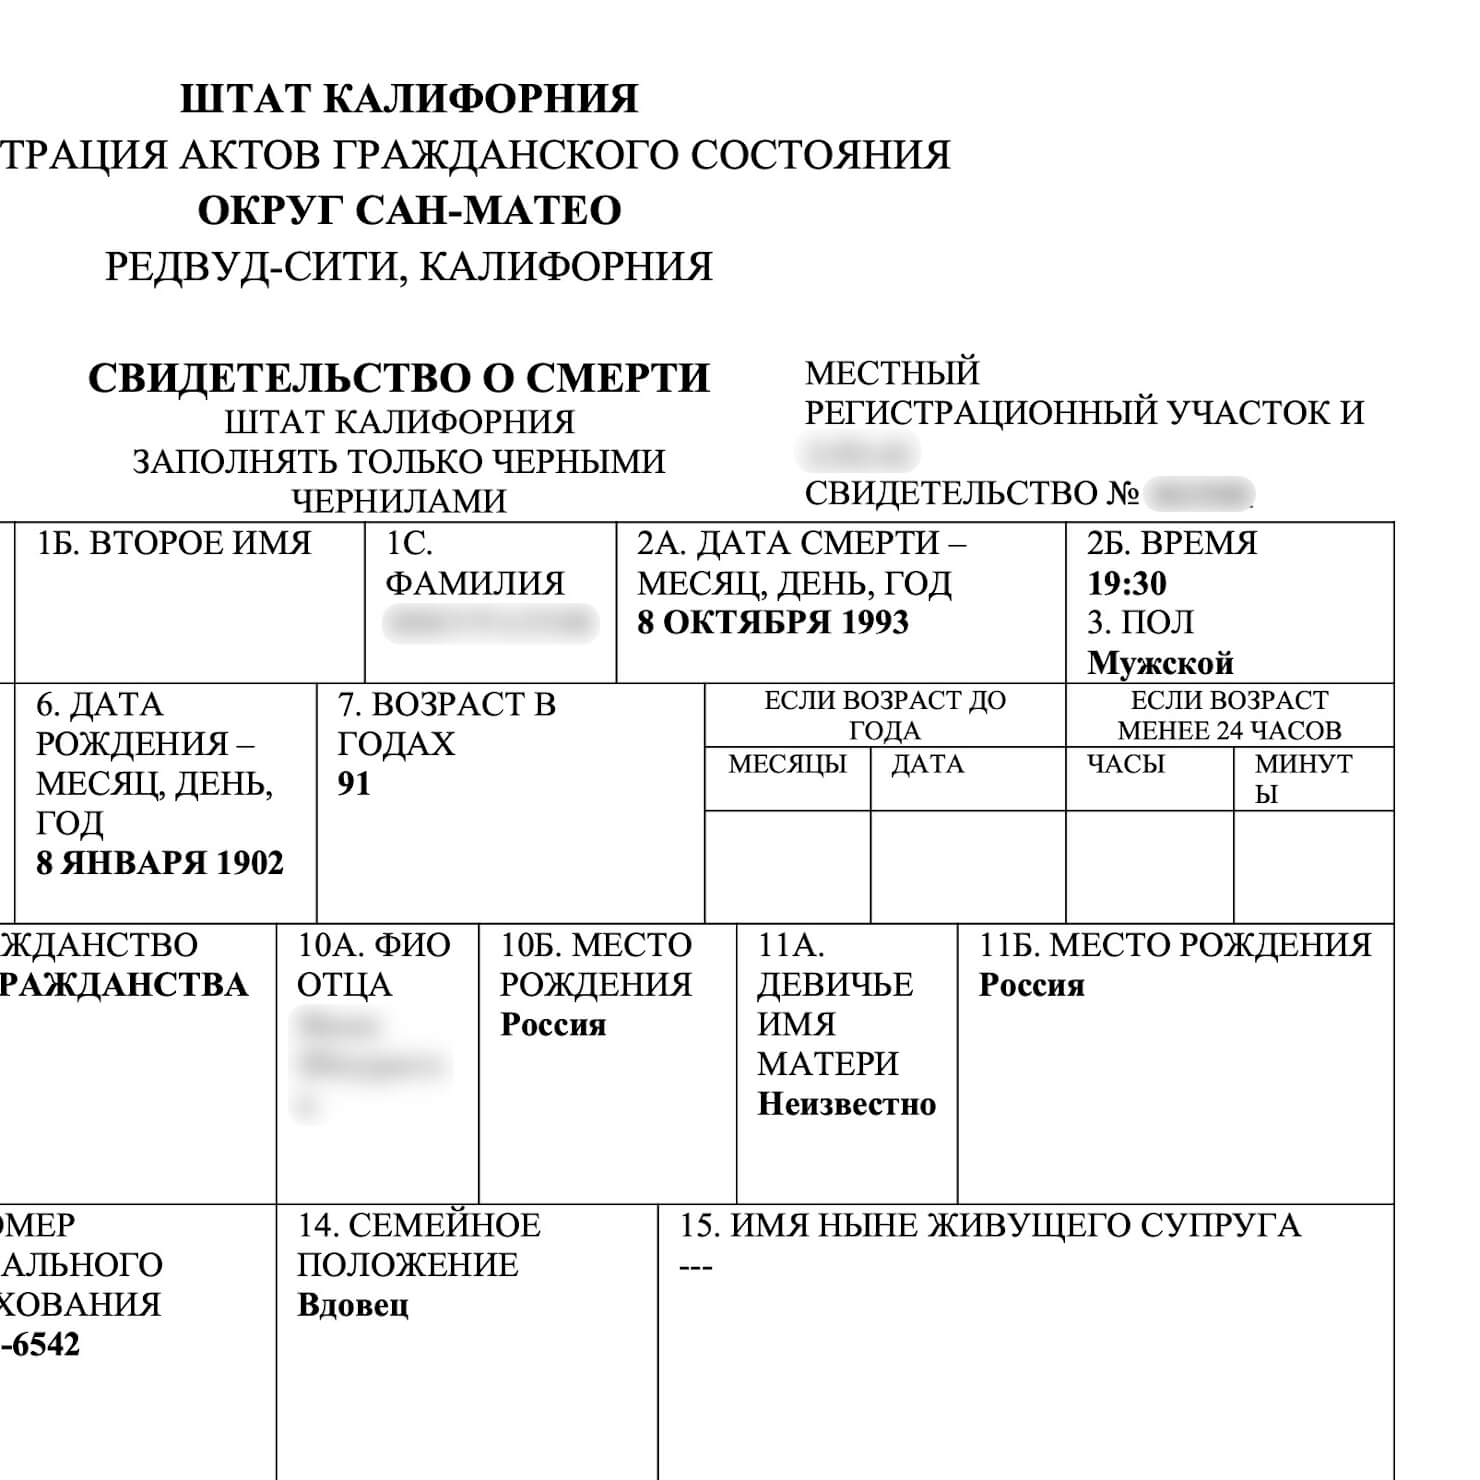 A fragment of a death certificate translated from English into Russian